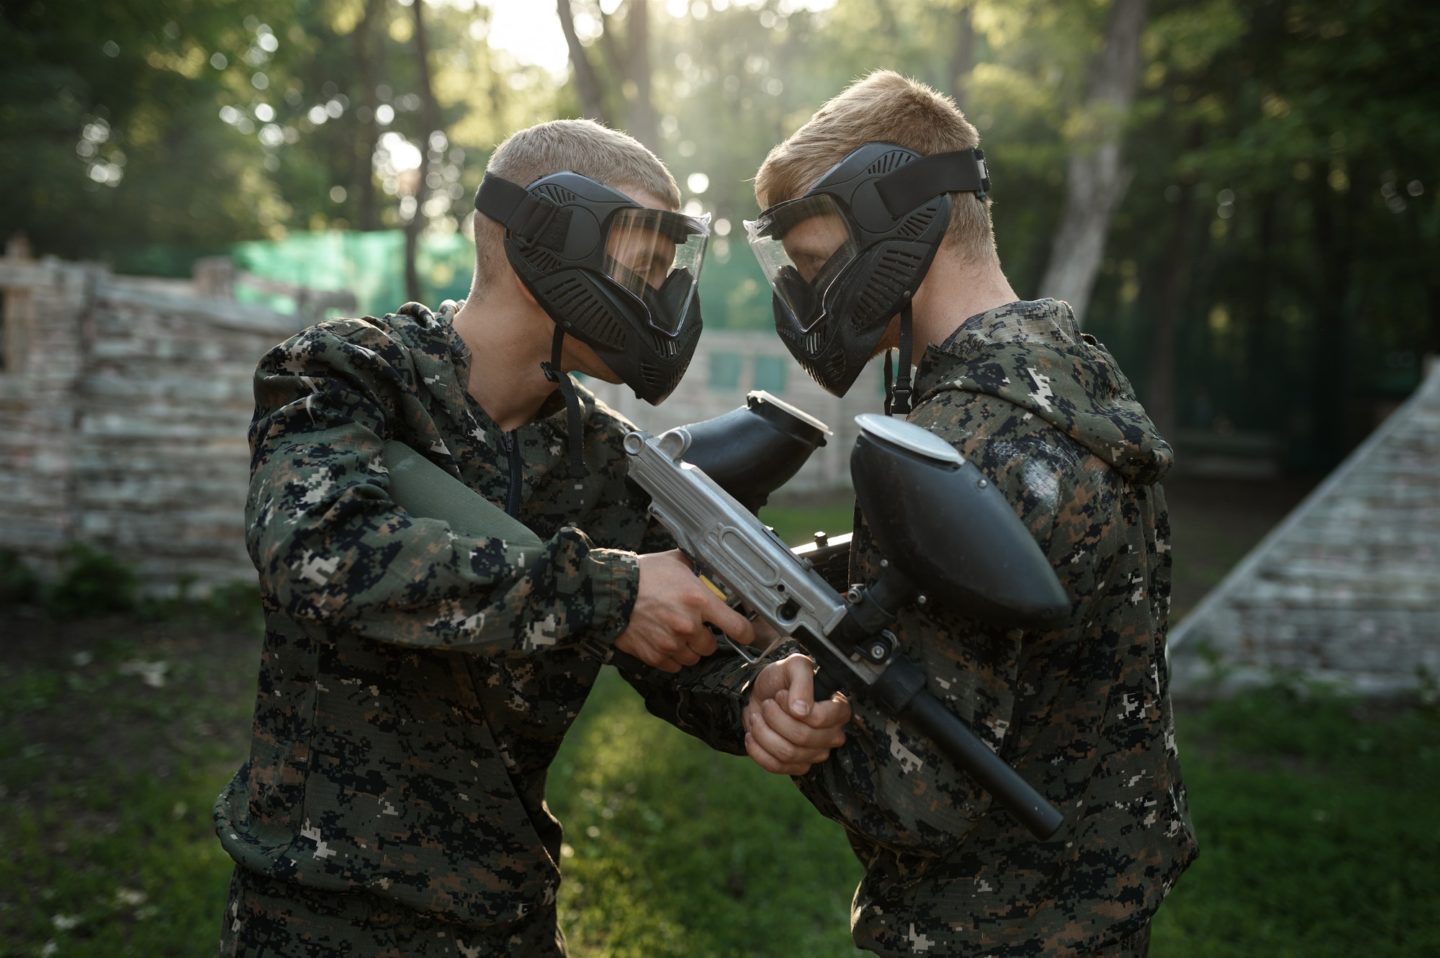 Two paintball players poses on playground